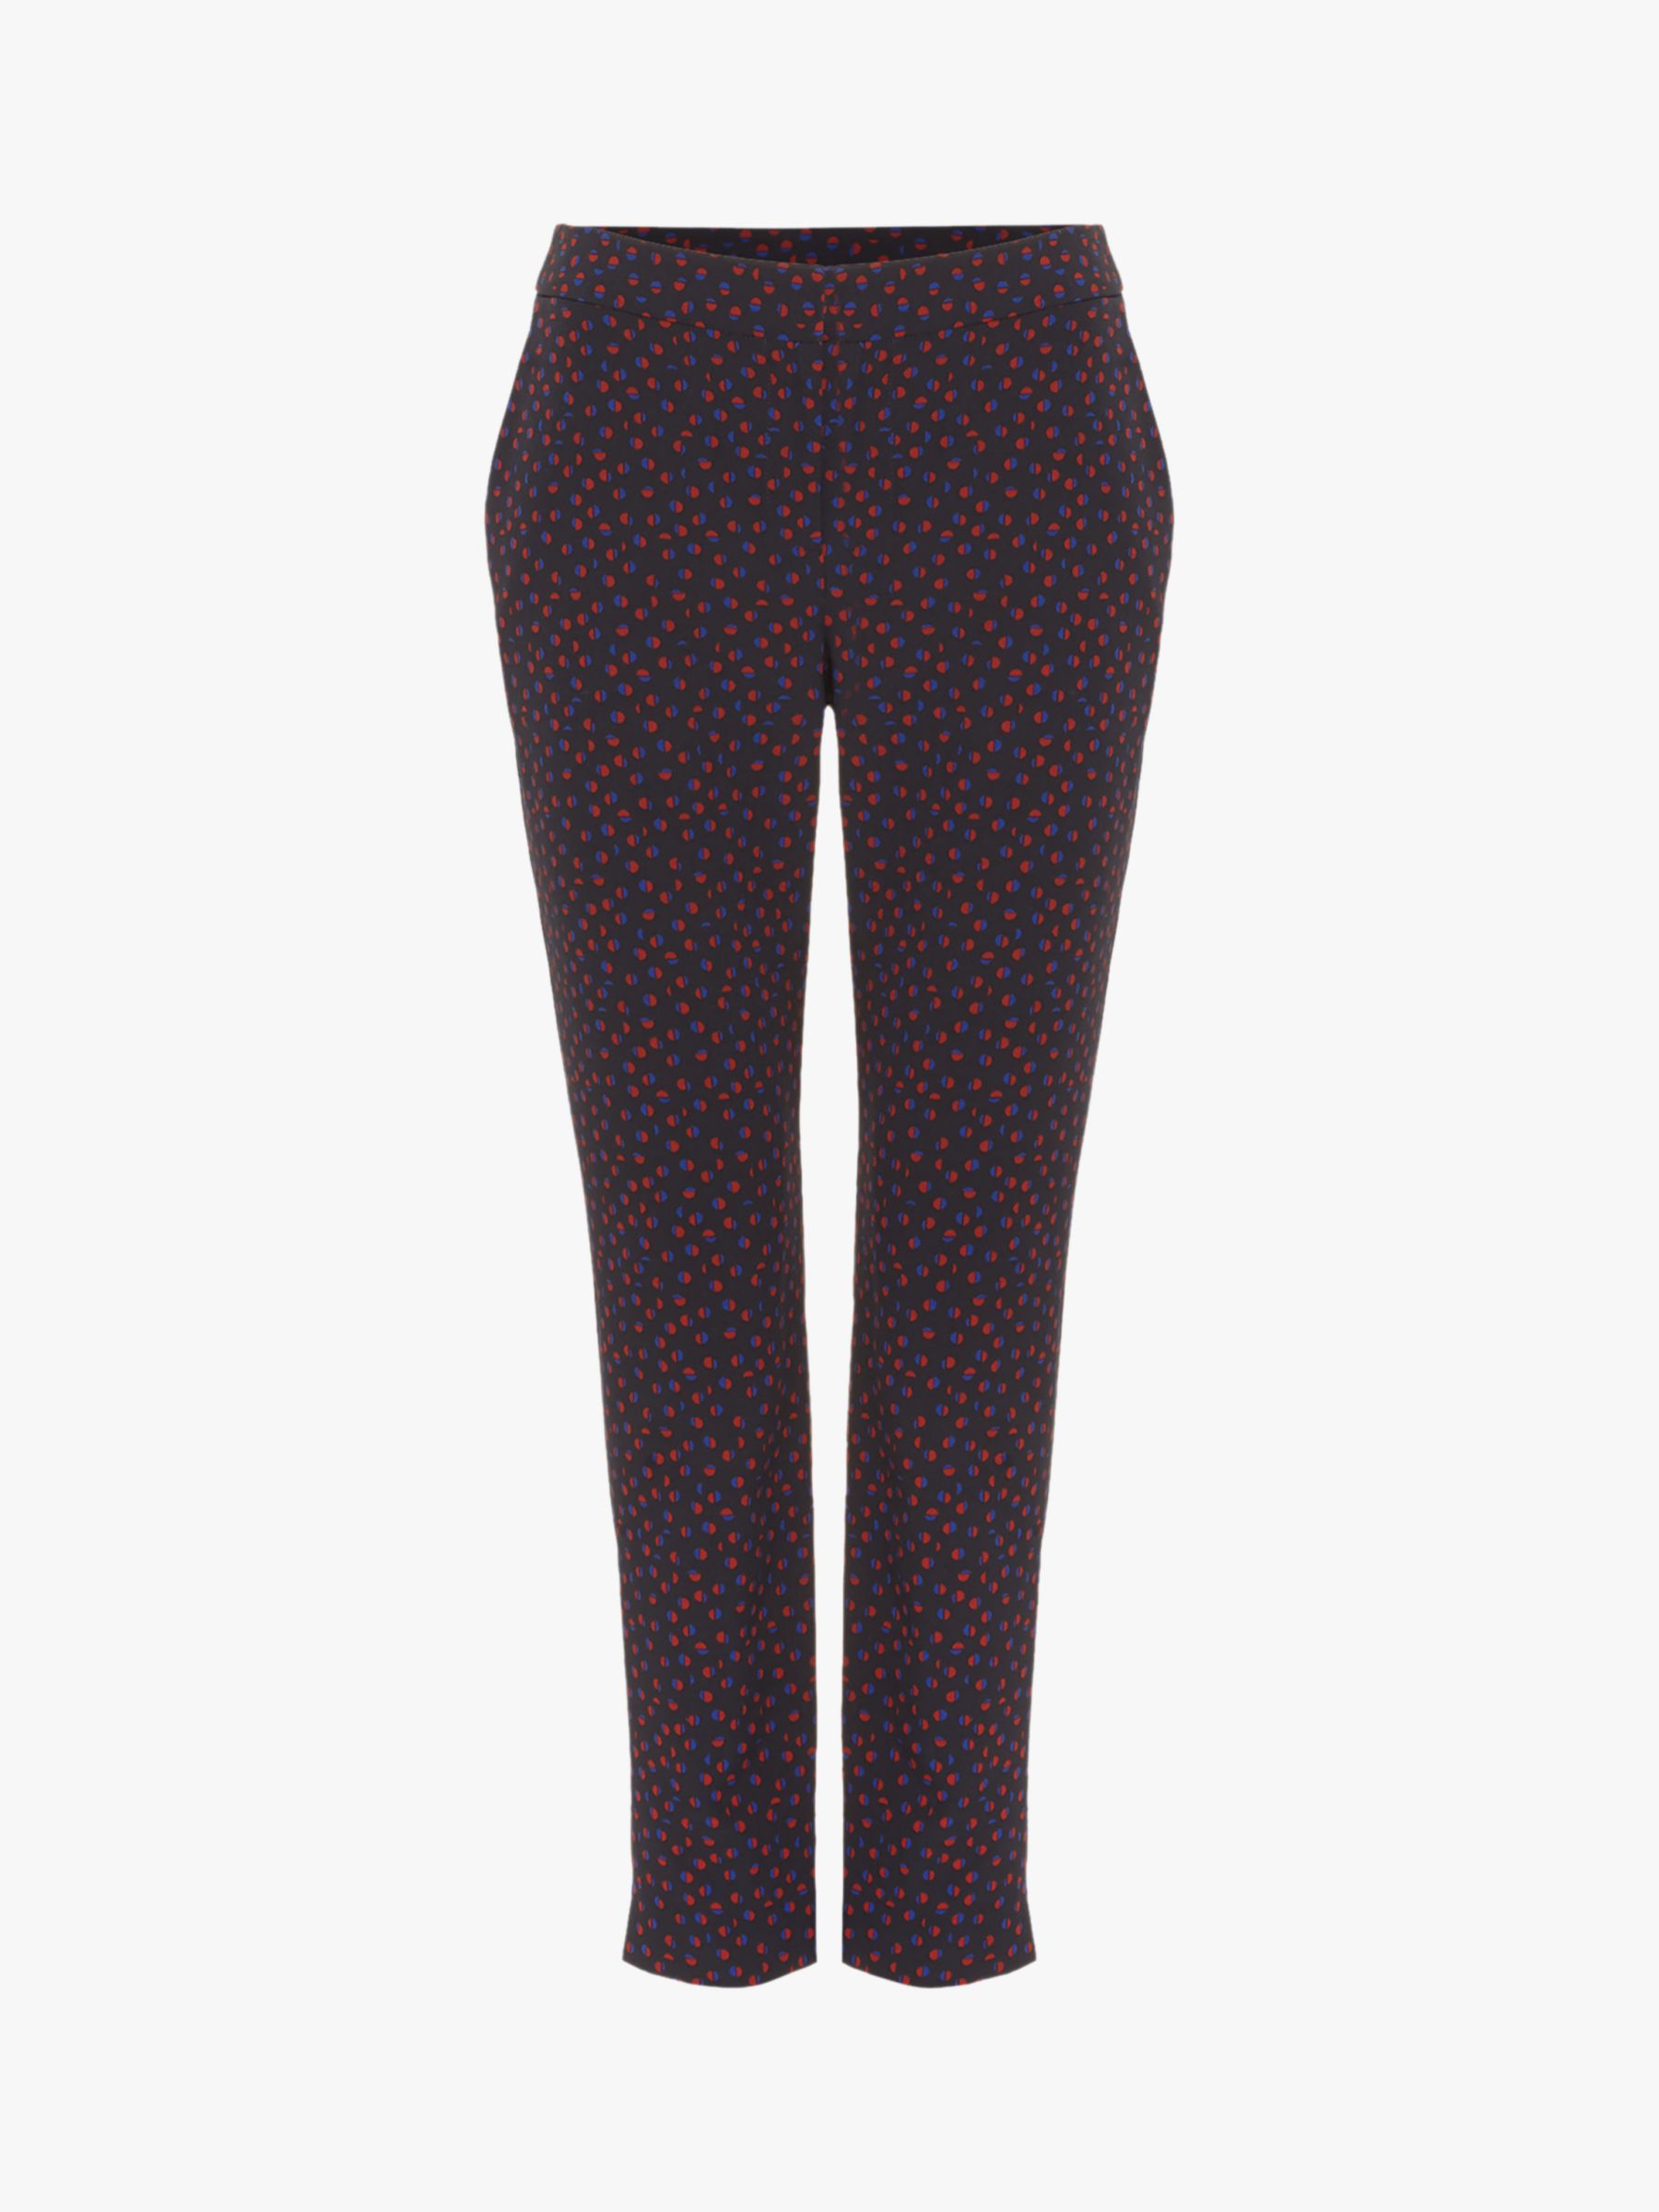 Phase Eight Orly Spot Trouser, Navy Multi